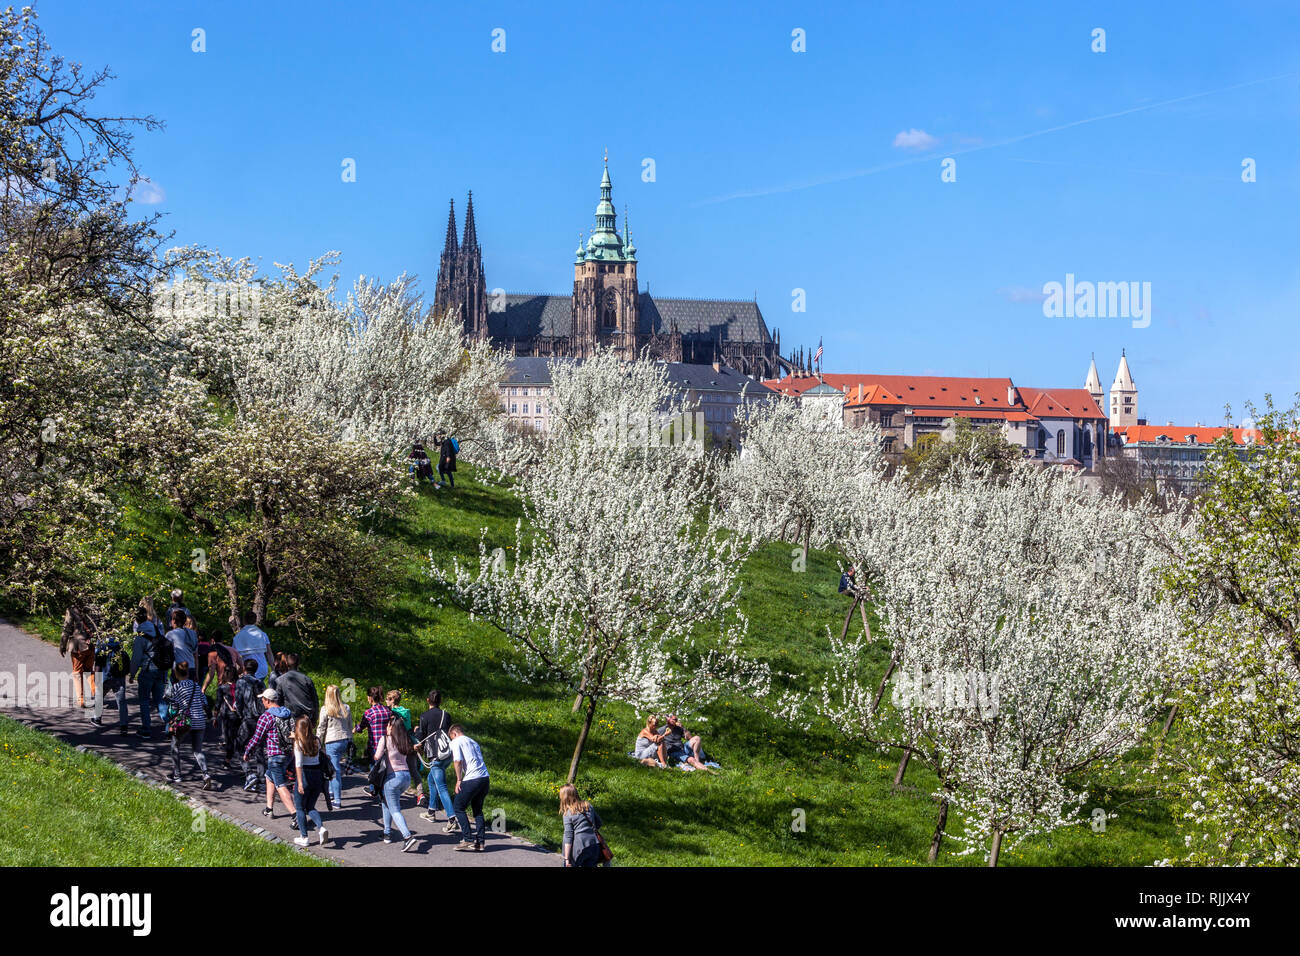 Flowering trees in Petrin park Prague Castle background, a crowd of people walking in the garden, Prague Castle panorama spring view, Czech Republic Stock Photo